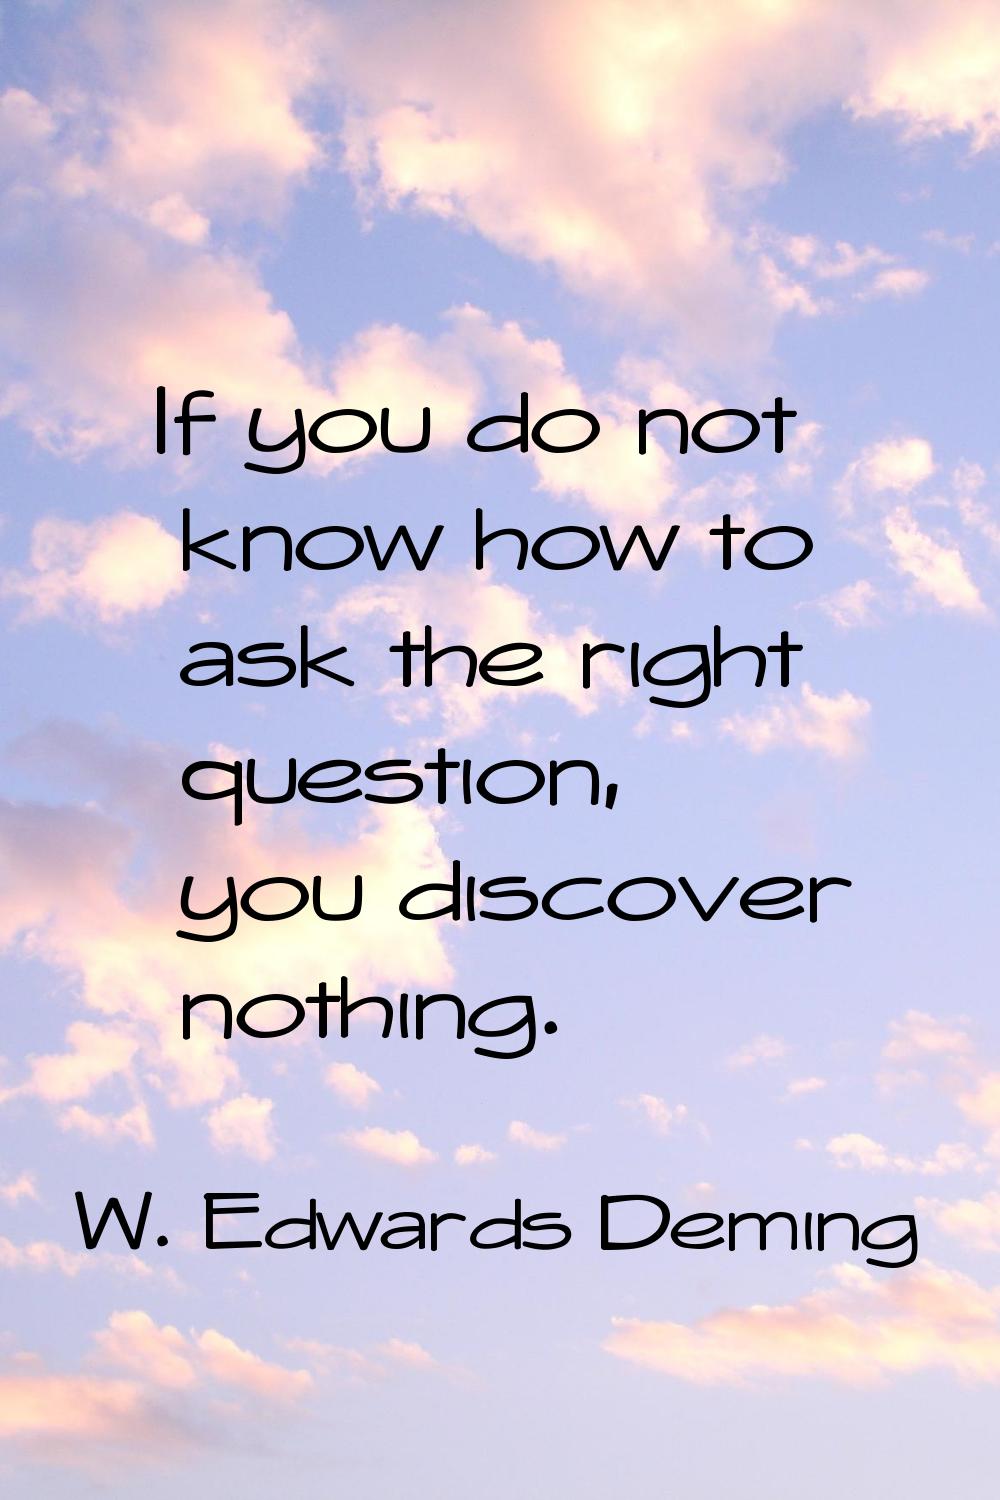 If you do not know how to ask the right question, you discover nothing.